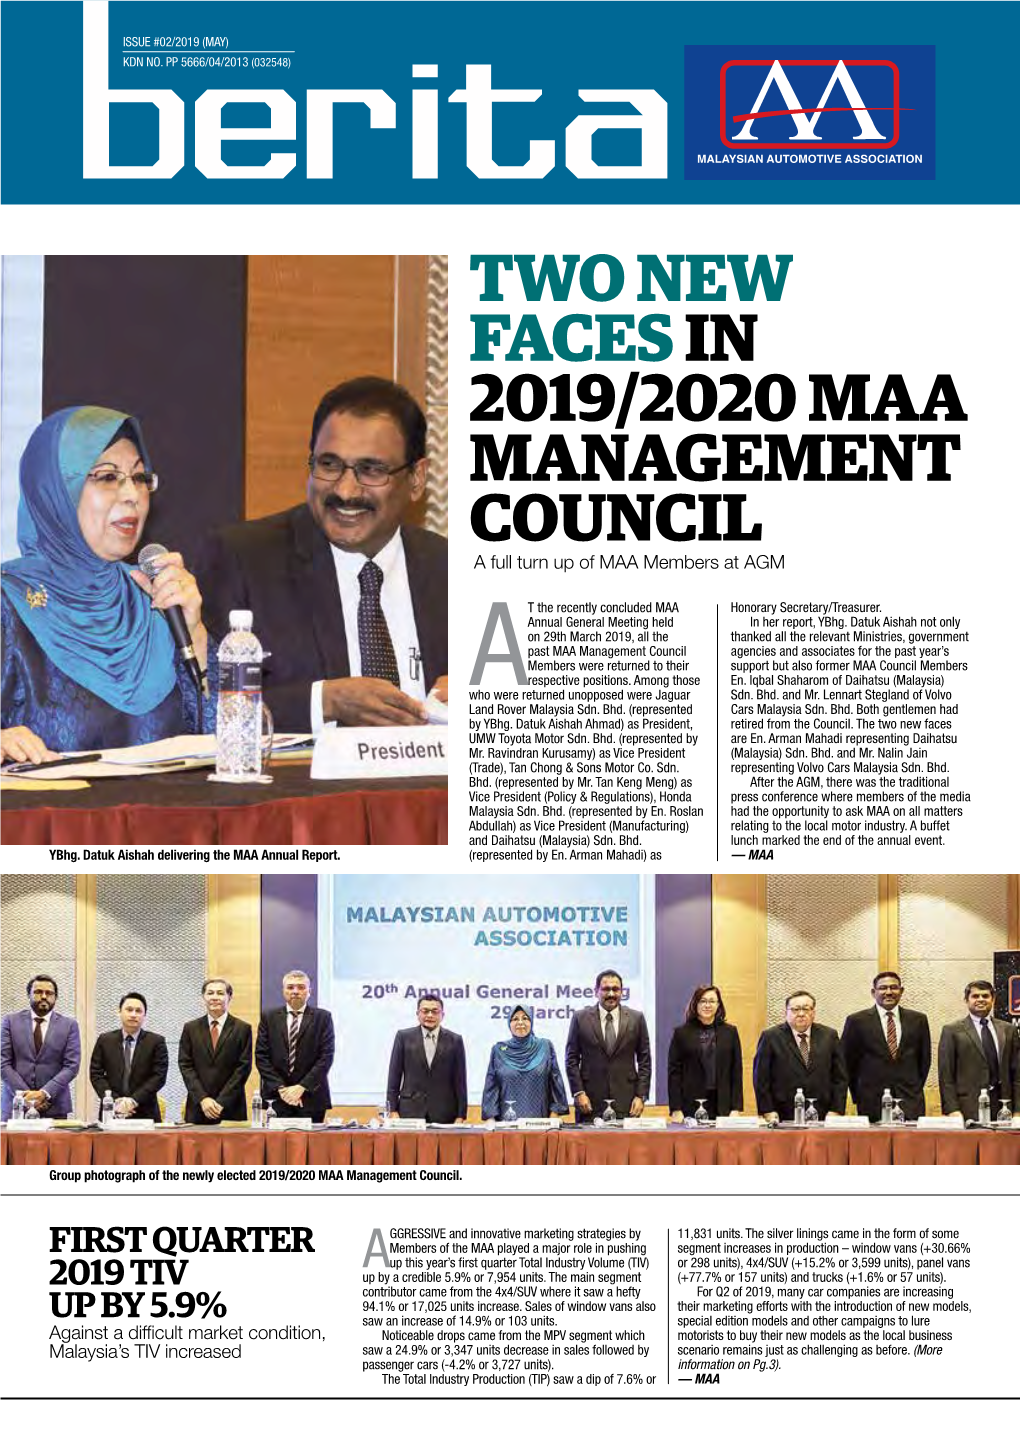 Two New Facesin 2019/2020 Maa Management Council